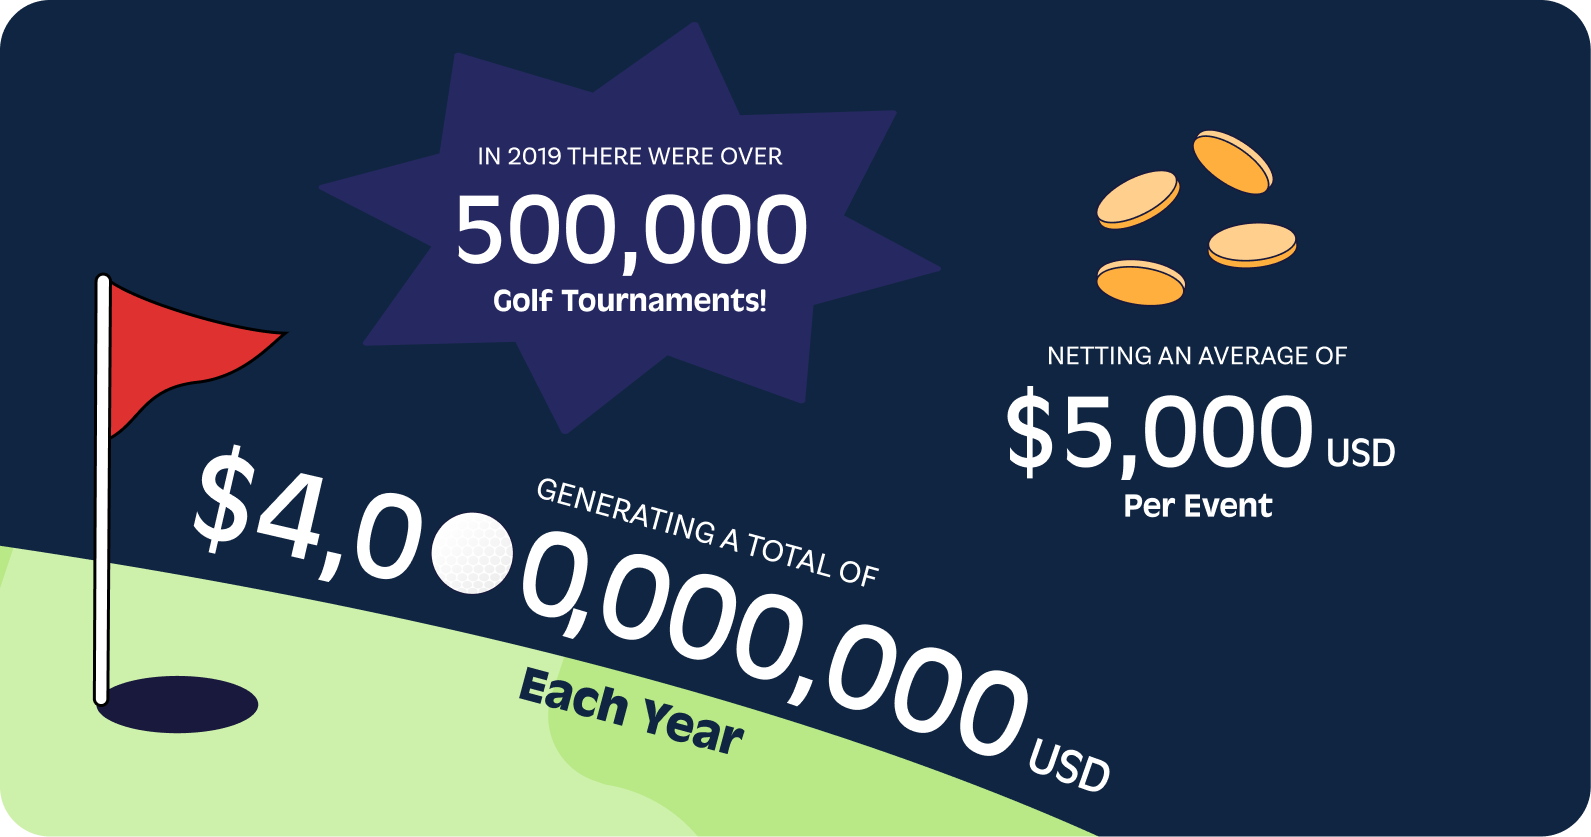 In 2019, there were over 500,000 charity golf outings in the U.S. alone, netting an average of $5,000 USD per event. Overall, golf tournament fundraising generates a whopping $4 billion USD each year.